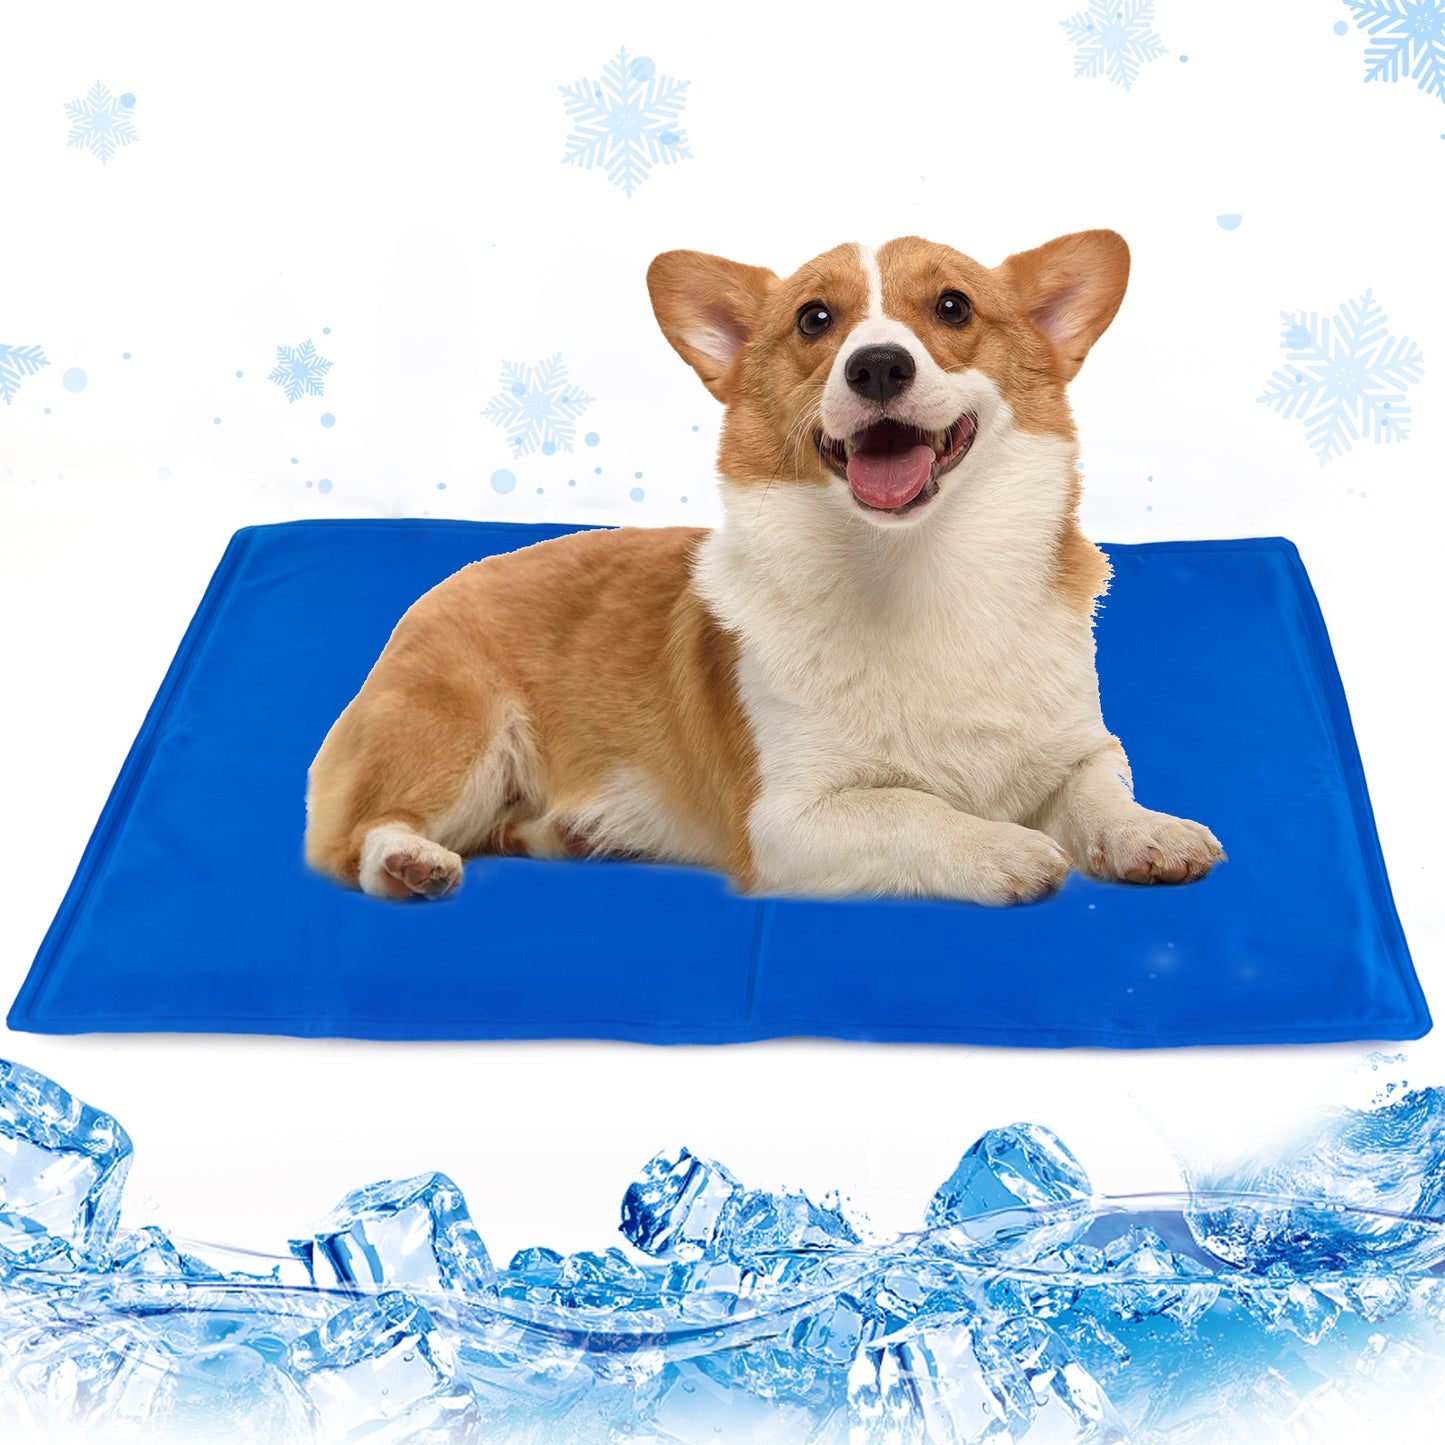 Dog Cooling Mat, Pet Cooling Mat For Dogs And Cats, Pressure Activated Dog Cooling Pad, No Water Or Refrigeration Needed, Non-Toxic Gel